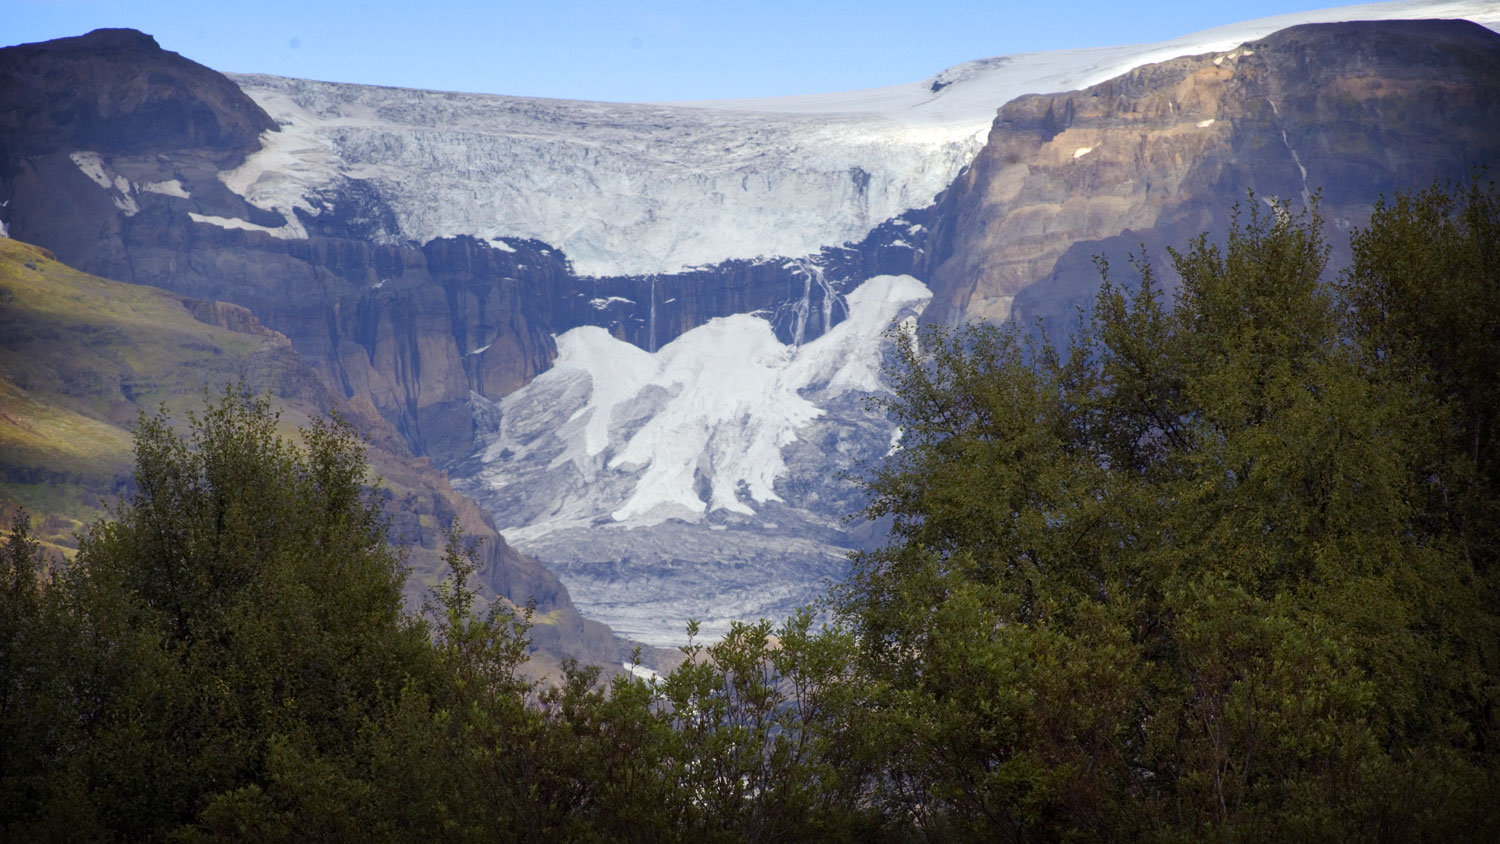 The glacier Morsárjökull with birch trees in foreground